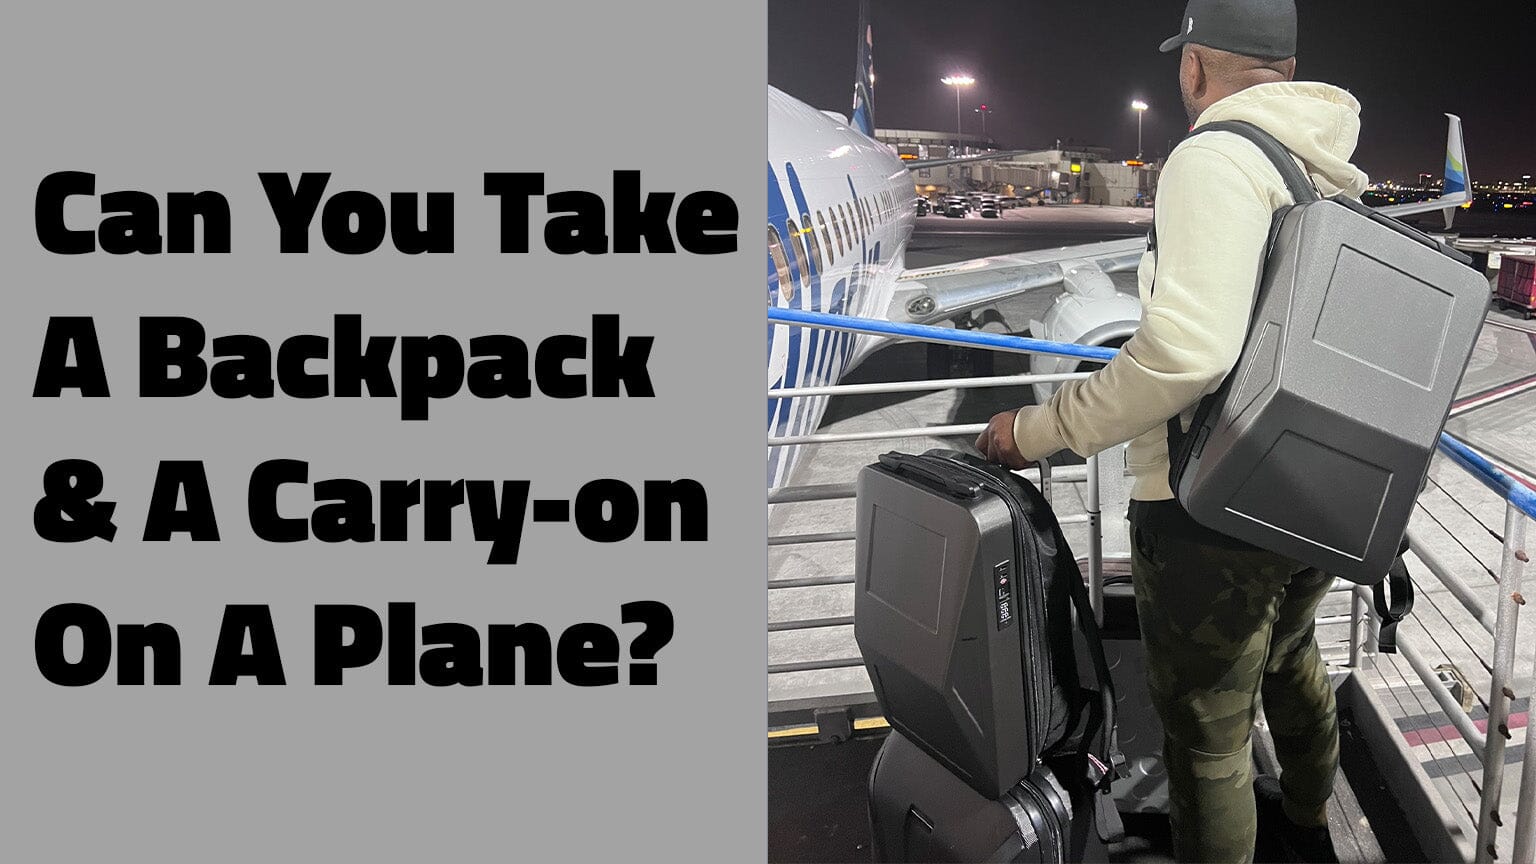 Can you take a backpack and a carry-on on a plane?